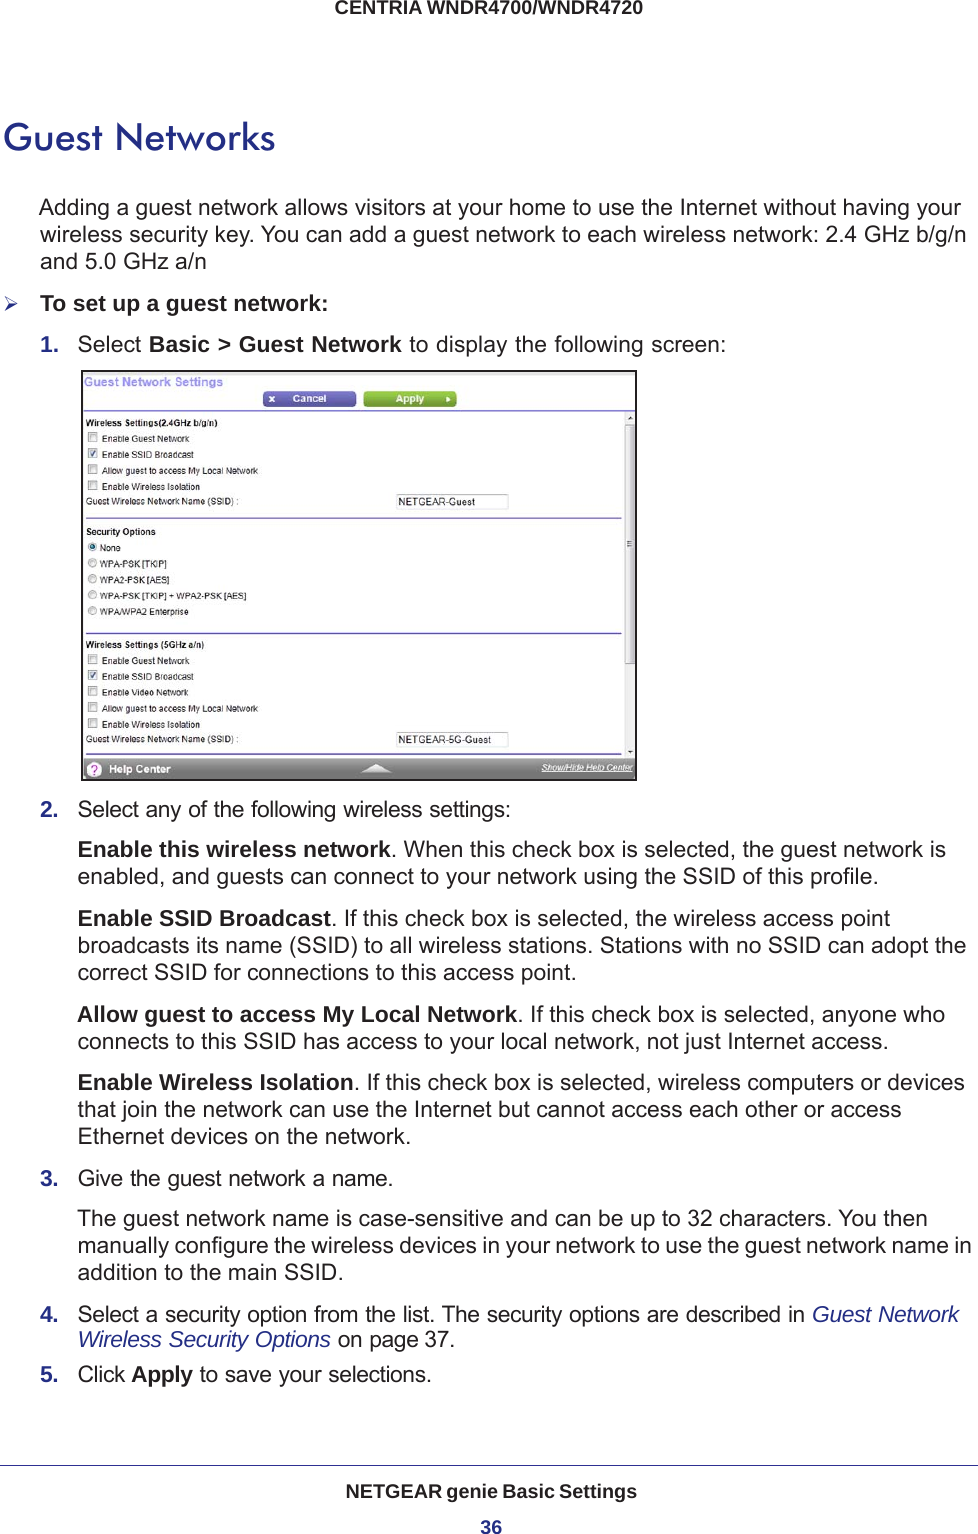 NETGEAR genie Basic Settings36CENTRIA WNDR4700/WNDR4720 Guest NetworksAdding a guest network allows visitors at your home to use the Internet without having your wireless security key. You can add a guest network to each wireless network: 2.4 GHz b/g/n and 5.0 GHz a/n To set up a guest network:1.  Select Basic &gt; Guest Network to display the following screen:2.  Select any of the following wireless settings:Enable this wireless network. When this check box is selected, the guest network is enabled, and guests can connect to your network using the SSID of this profile.Enable SSID Broadcast. If this check box is selected, the wireless access point broadcasts its name (SSID) to all wireless stations. Stations with no SSID can adopt the correct SSID for connections to this access point.Allow guest to access My Local Network. If this check box is selected, anyone who connects to this SSID has access to your local network, not just Internet access.Enable Wireless Isolation. If this check box is selected, wireless computers or devices that join the network can use the Internet but cannot access each other or access Ethernet devices on the network.3.  Give the guest network a name.The guest network name is case-sensitive and can be up to 32 characters. You then manually configure the wireless devices in your network to use the guest network name in addition to the main SSID. 4.  Select a security option from the list. The security options are described in Guest Network Wireless Security Options on page 37.5.  Click Apply to save your selections.